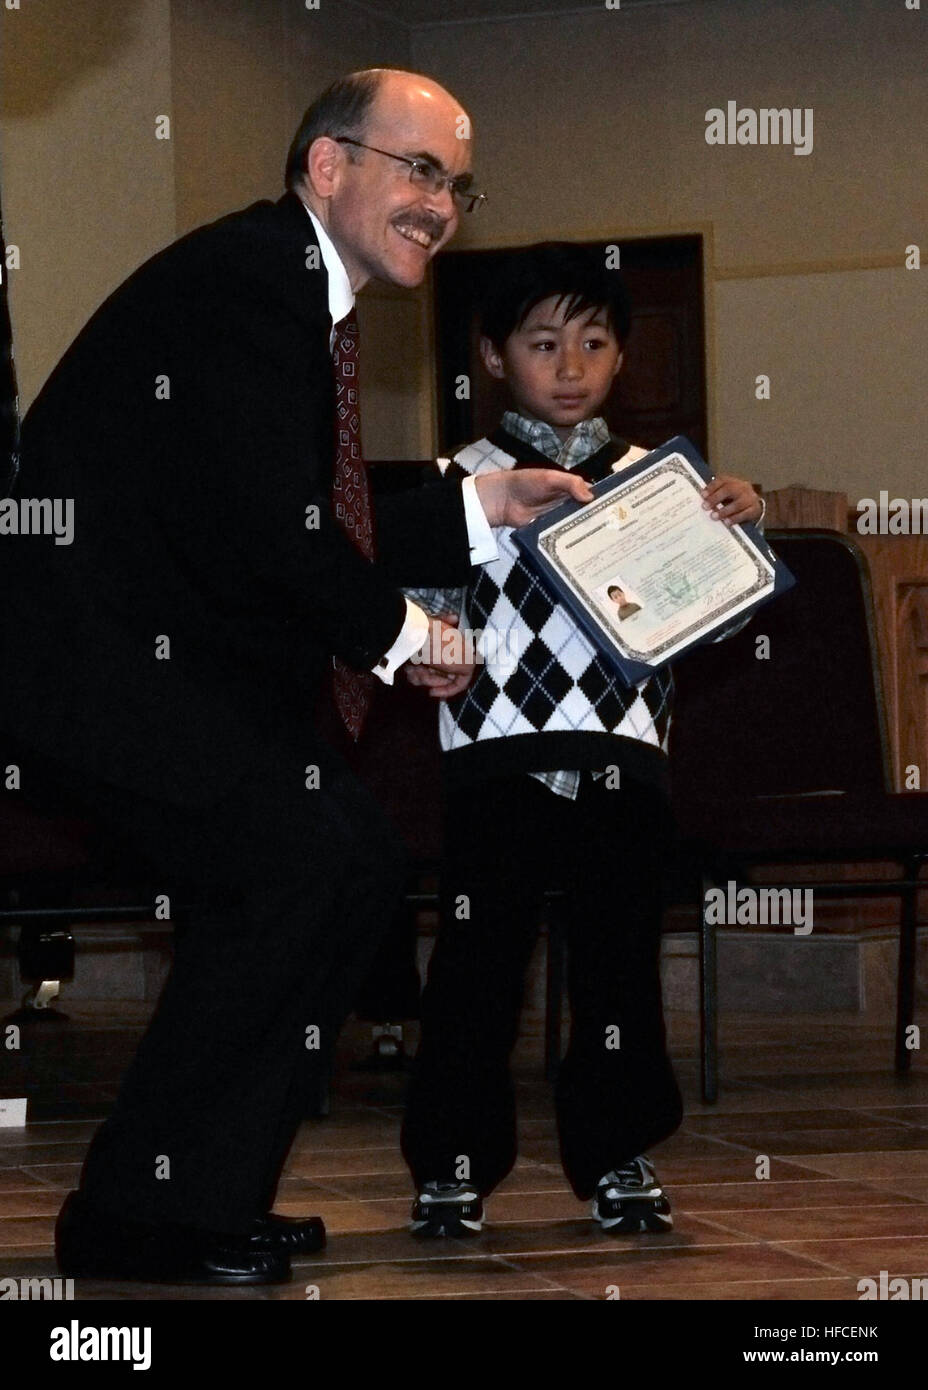 James P. Zumwalt, Charge d'Affaires ad interim of U.S. Embassy Tokyo, presents a certificate of citizenship to 7-year-old Martin Ulsano during a naturalization ceremony at Fleet Activities Yokosuka's Chapel of Hope. Ulsano is the first child to be naturalized overseas under the National Defense Authorization Act of 2008. The new citizens, more than 70 service members and family members come from diverse backgrounds, hailing from China, Columbia, Dominican Republic, Ecuador, El Salvador, England, France, Ghana, Guyana, Haiti, Jamaica, Japan, Kenya, Korea, Mexico, Morocco, Philippines, Romania,  Stock Photo